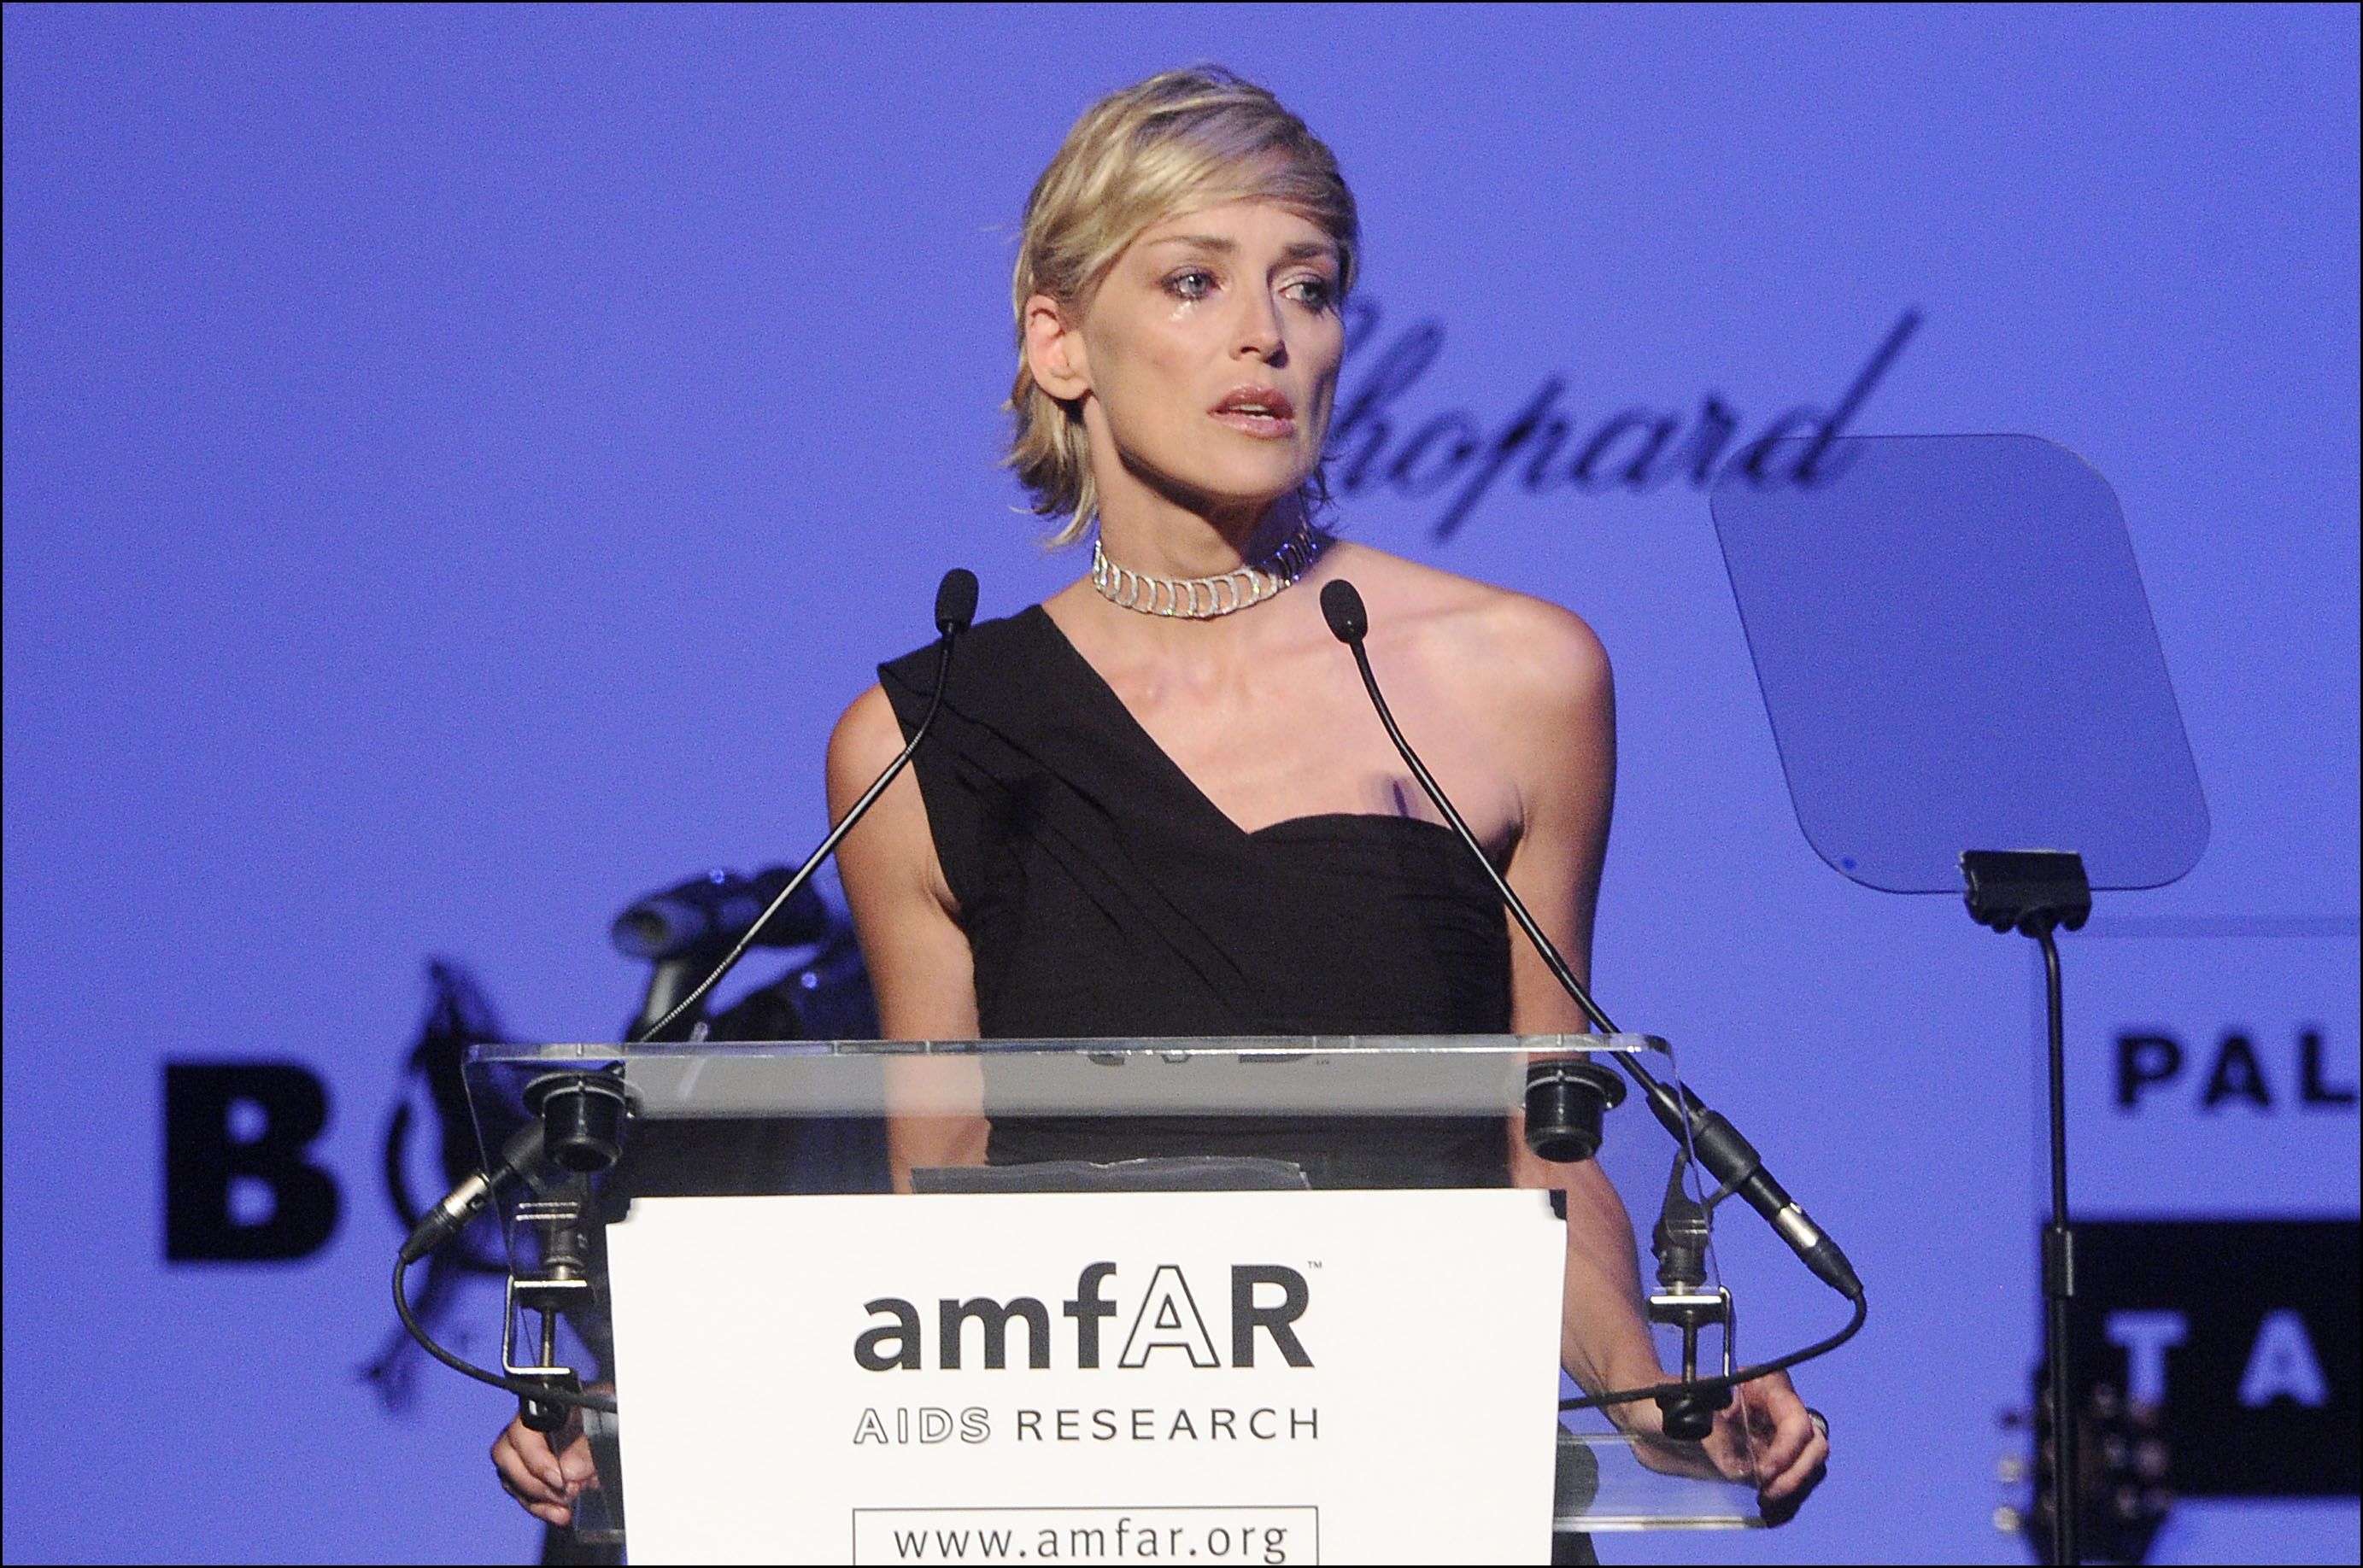 Sharon Stone at the AmfAR Cinema against AIDS Gala and auction during the 62nd Cannes Film Festival in Antibes, France on May 21, 2009. | Source: Getty Images